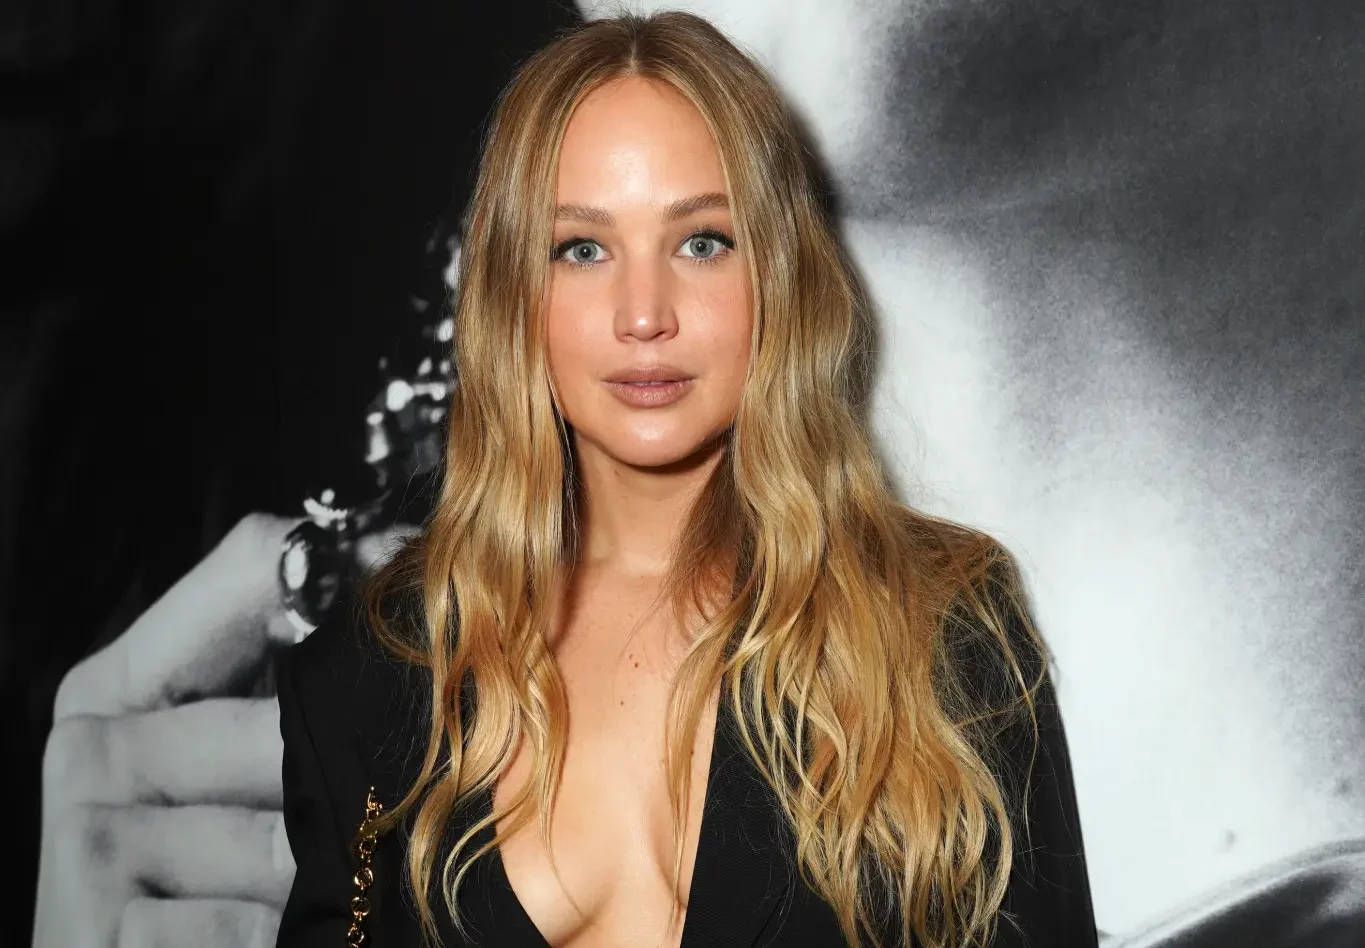 Jennifer Lawrence's Dior Appearance Sparks Buzz: Natural Glow or Hollywood Makeover?